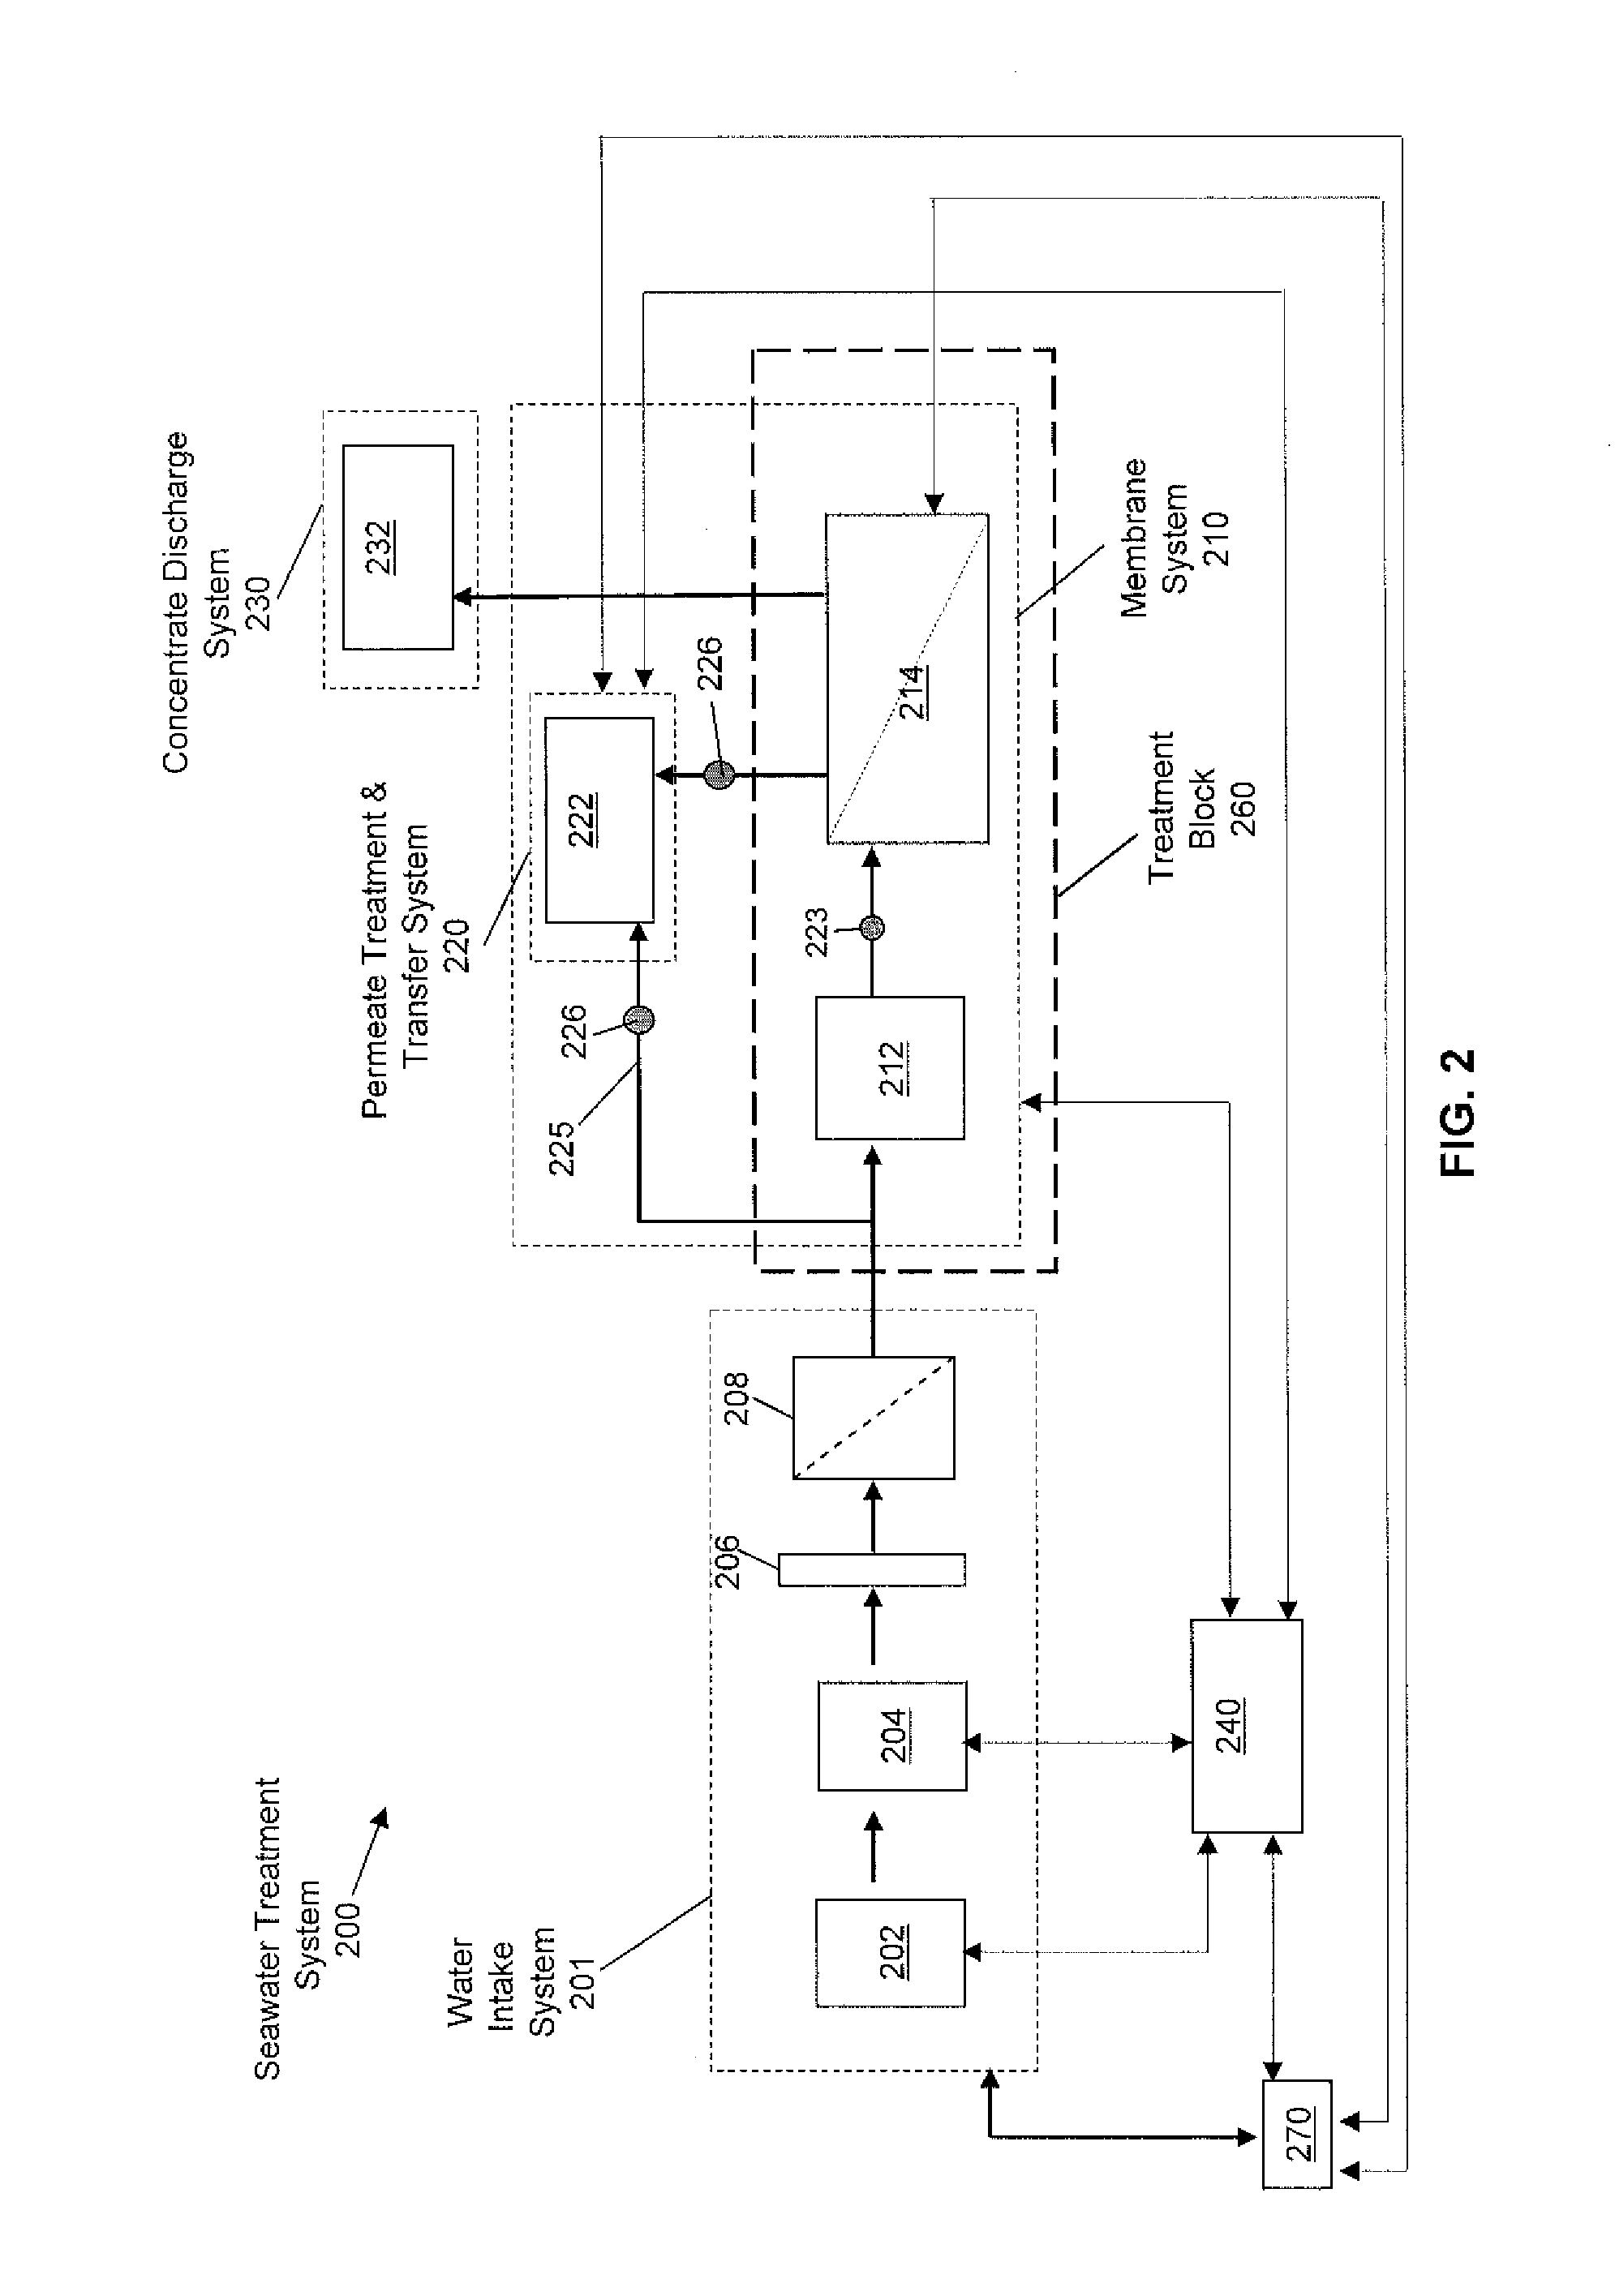 Method and control devices for production of consistent water quality from membrane-based water treatment for use in improved hydrocarbon recovery operations